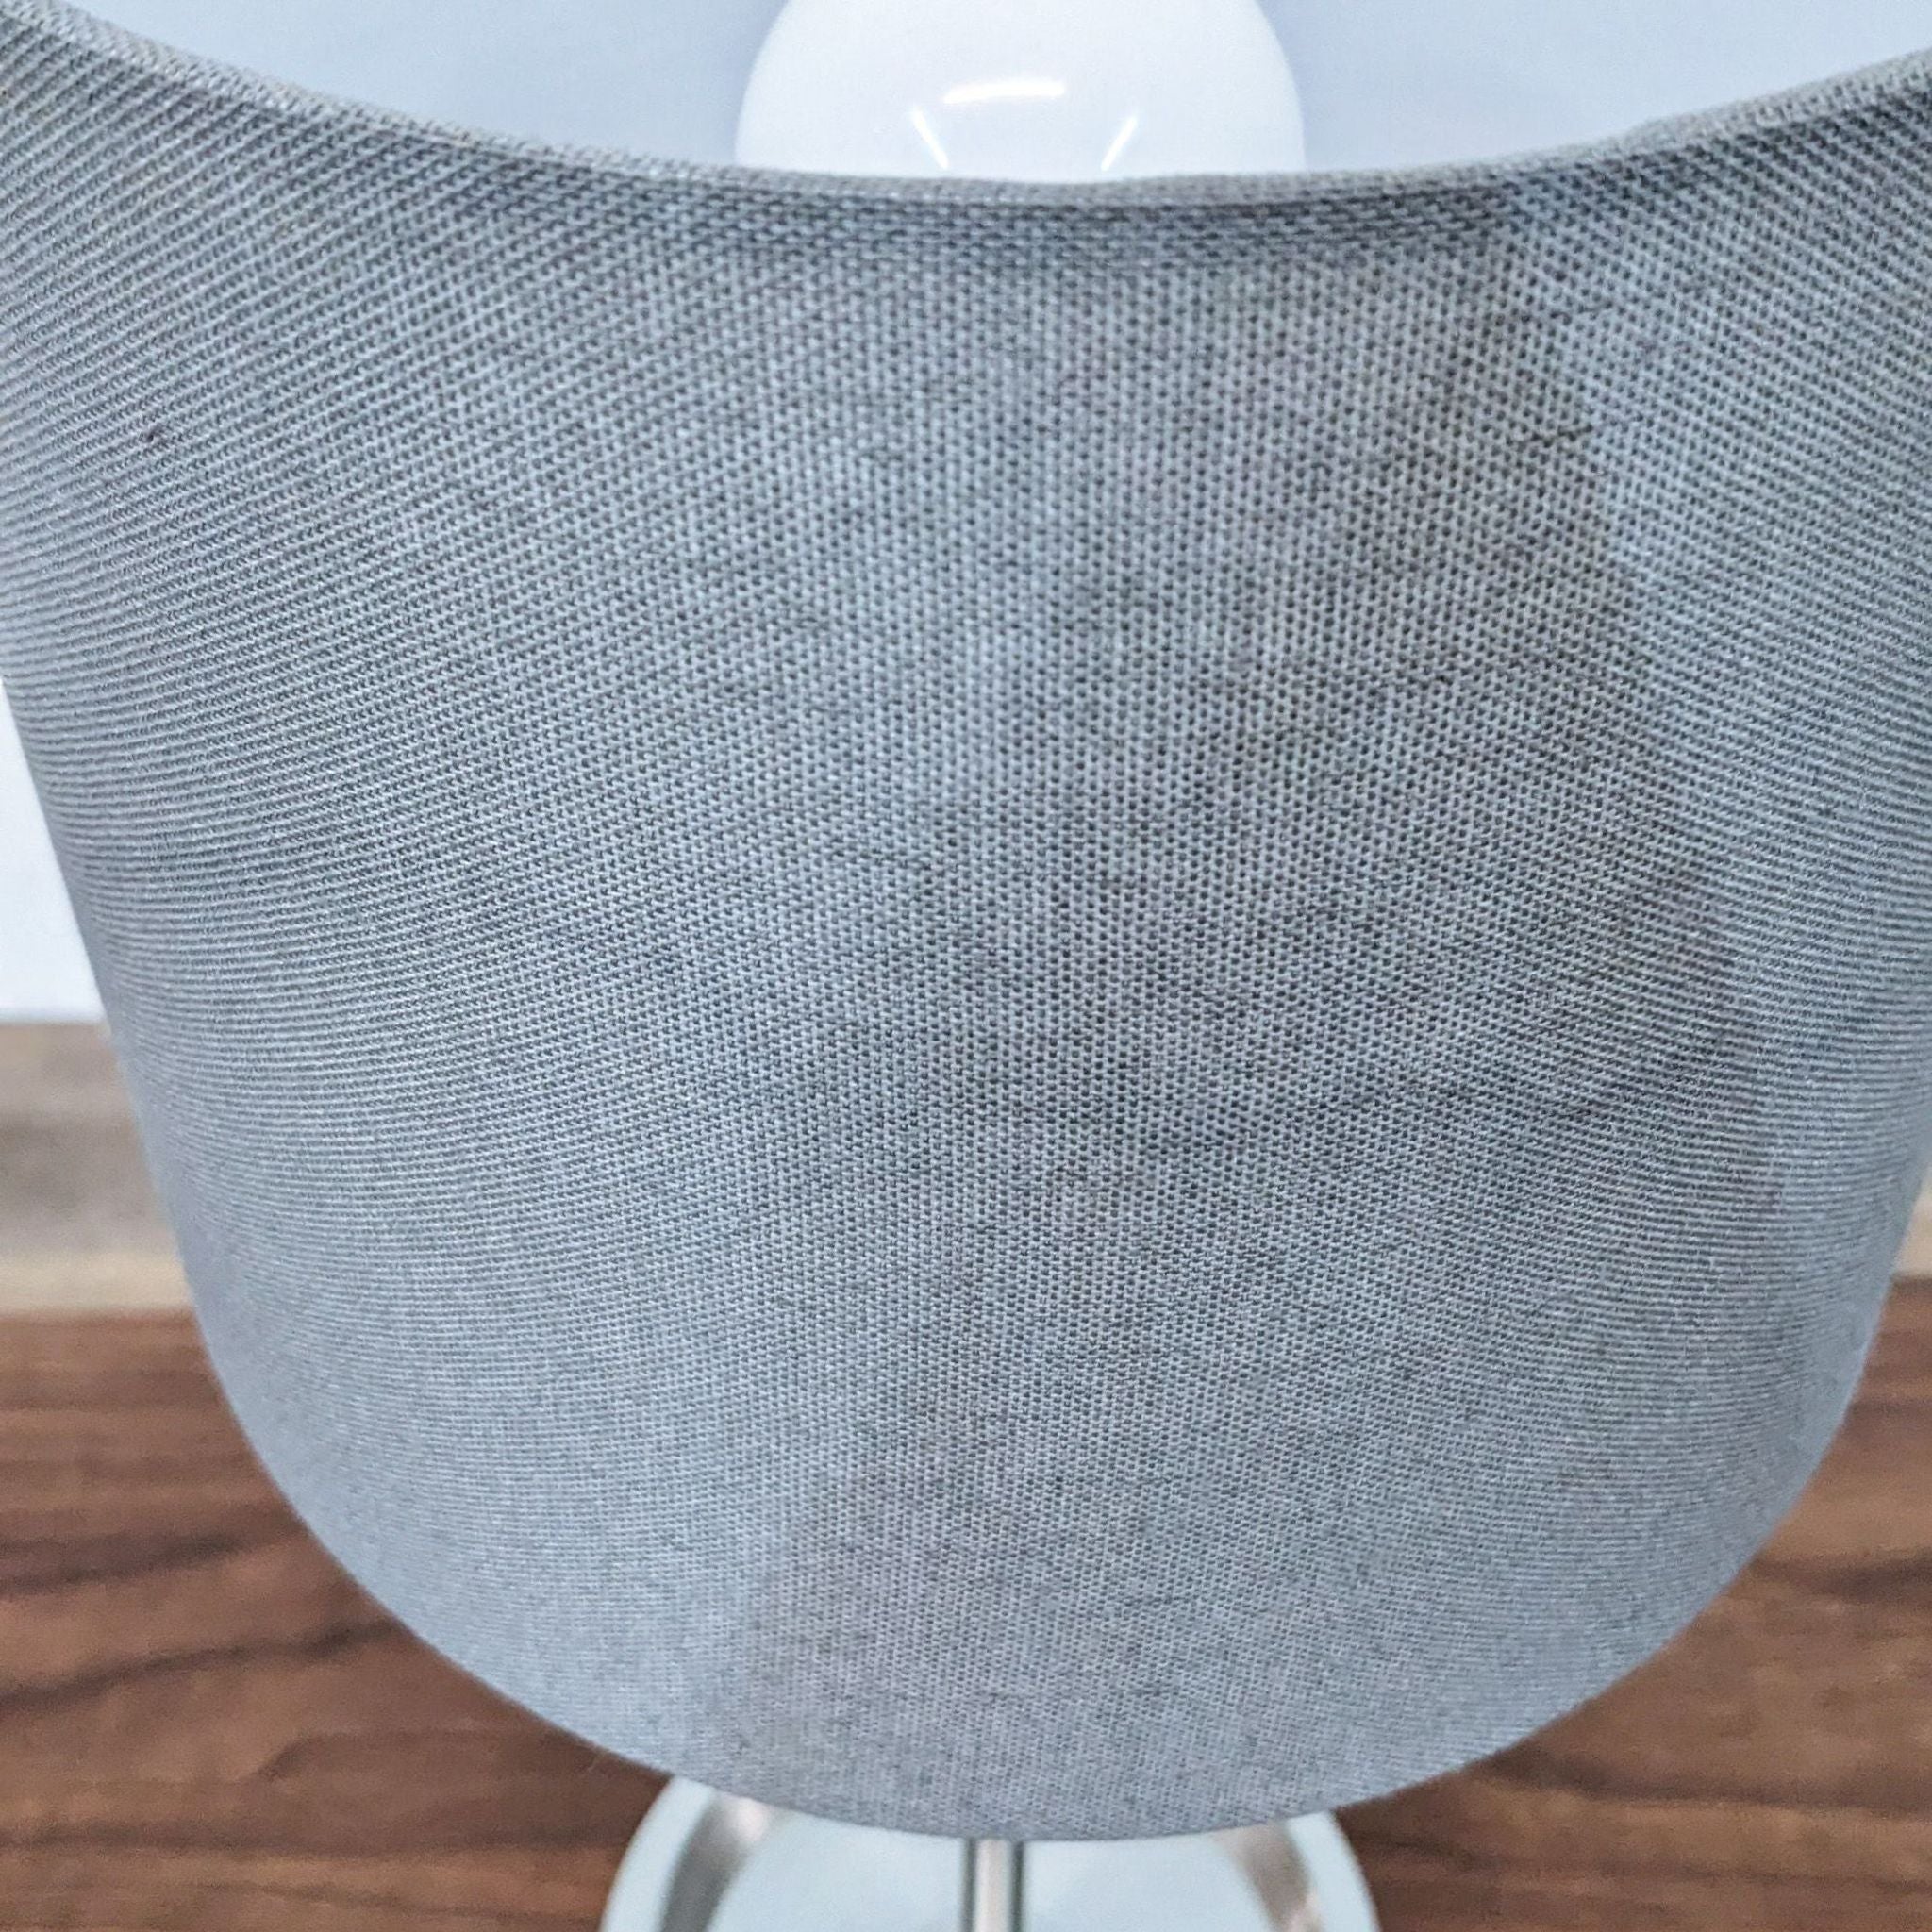 Close-up of a Reperch brand lamp with a gray fabric shade and white base on a wooden floor.